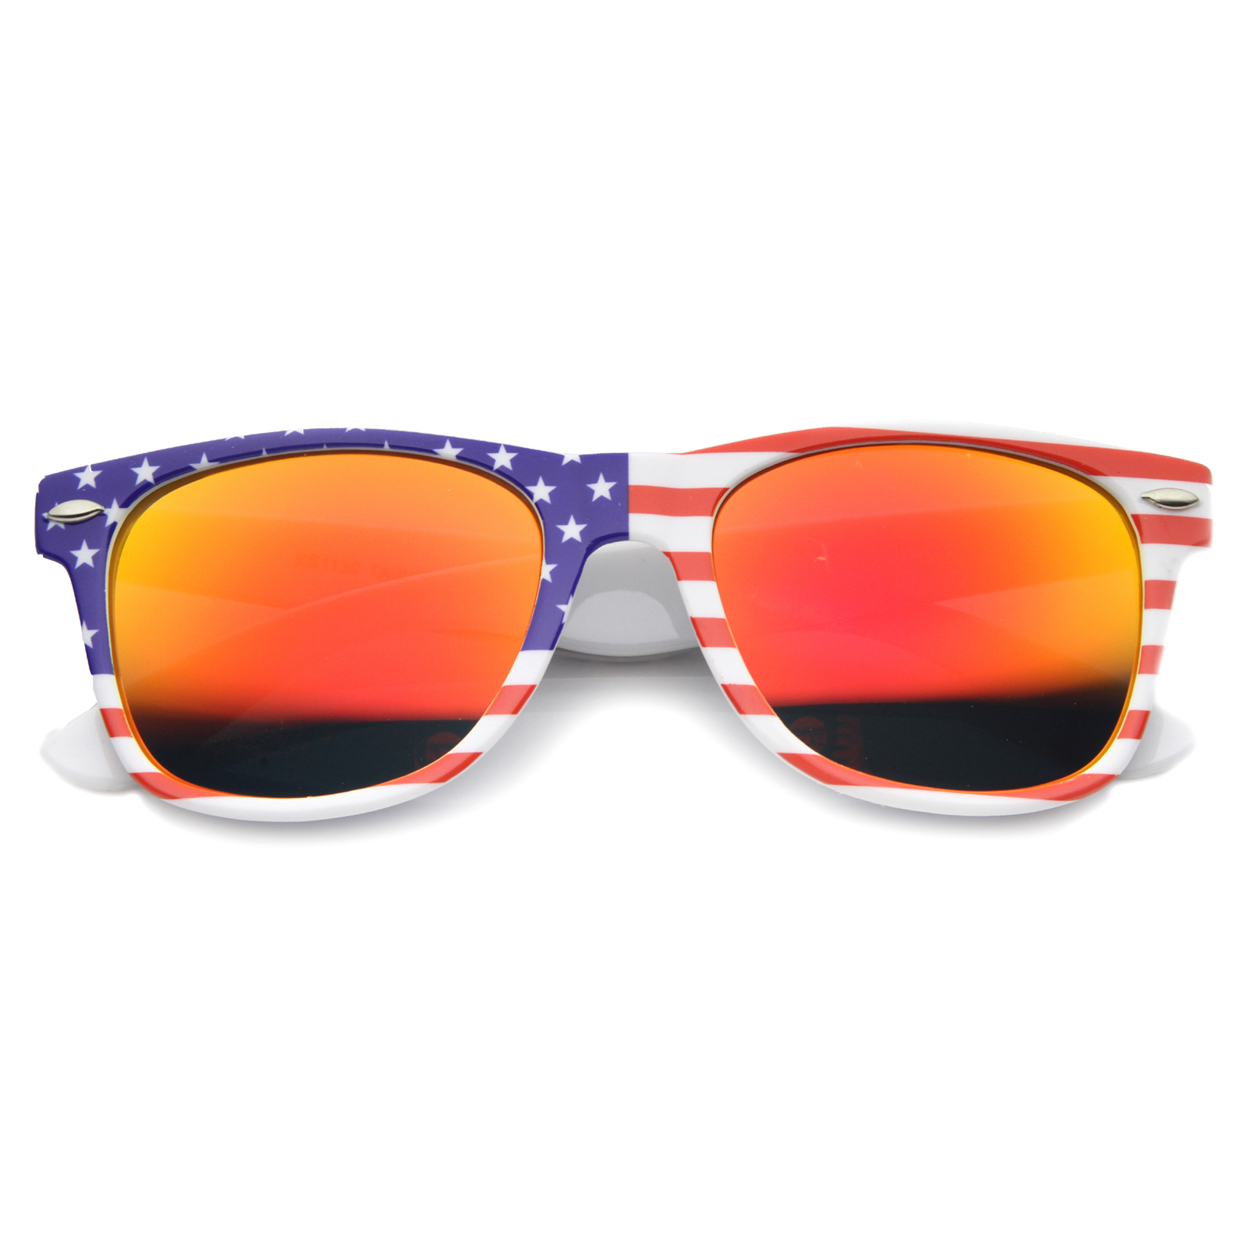 Mens Horn Rimmed Sunglasses With UV400 Protected Mirrored Lens 9960 - American Flag / Fire